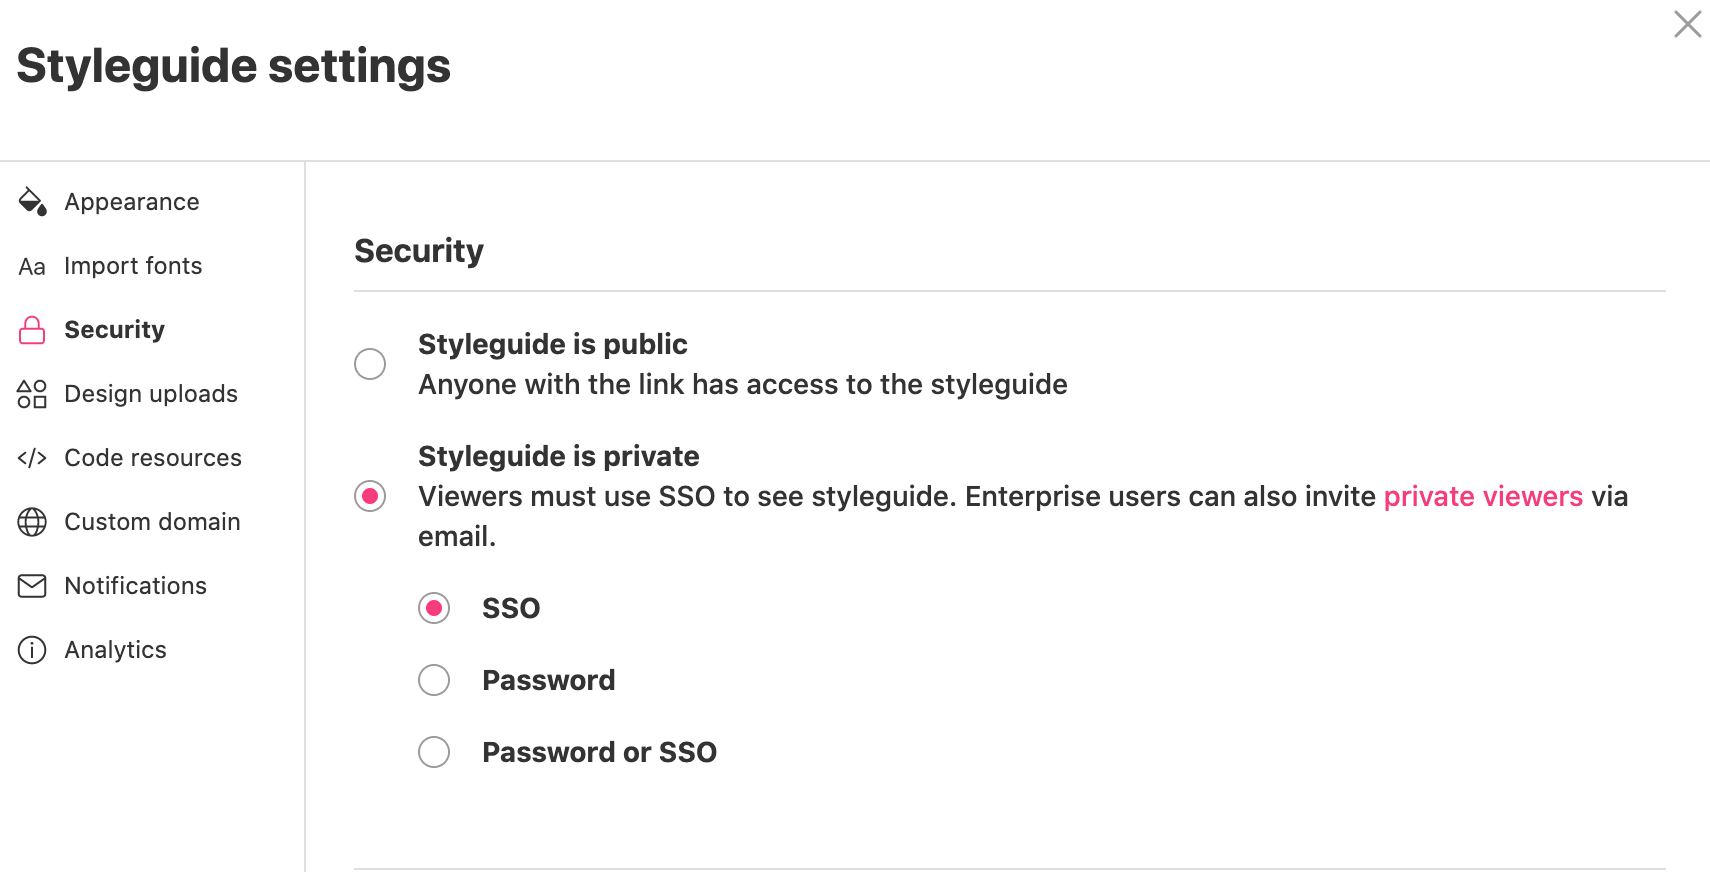 Security section in the Styleguide settings